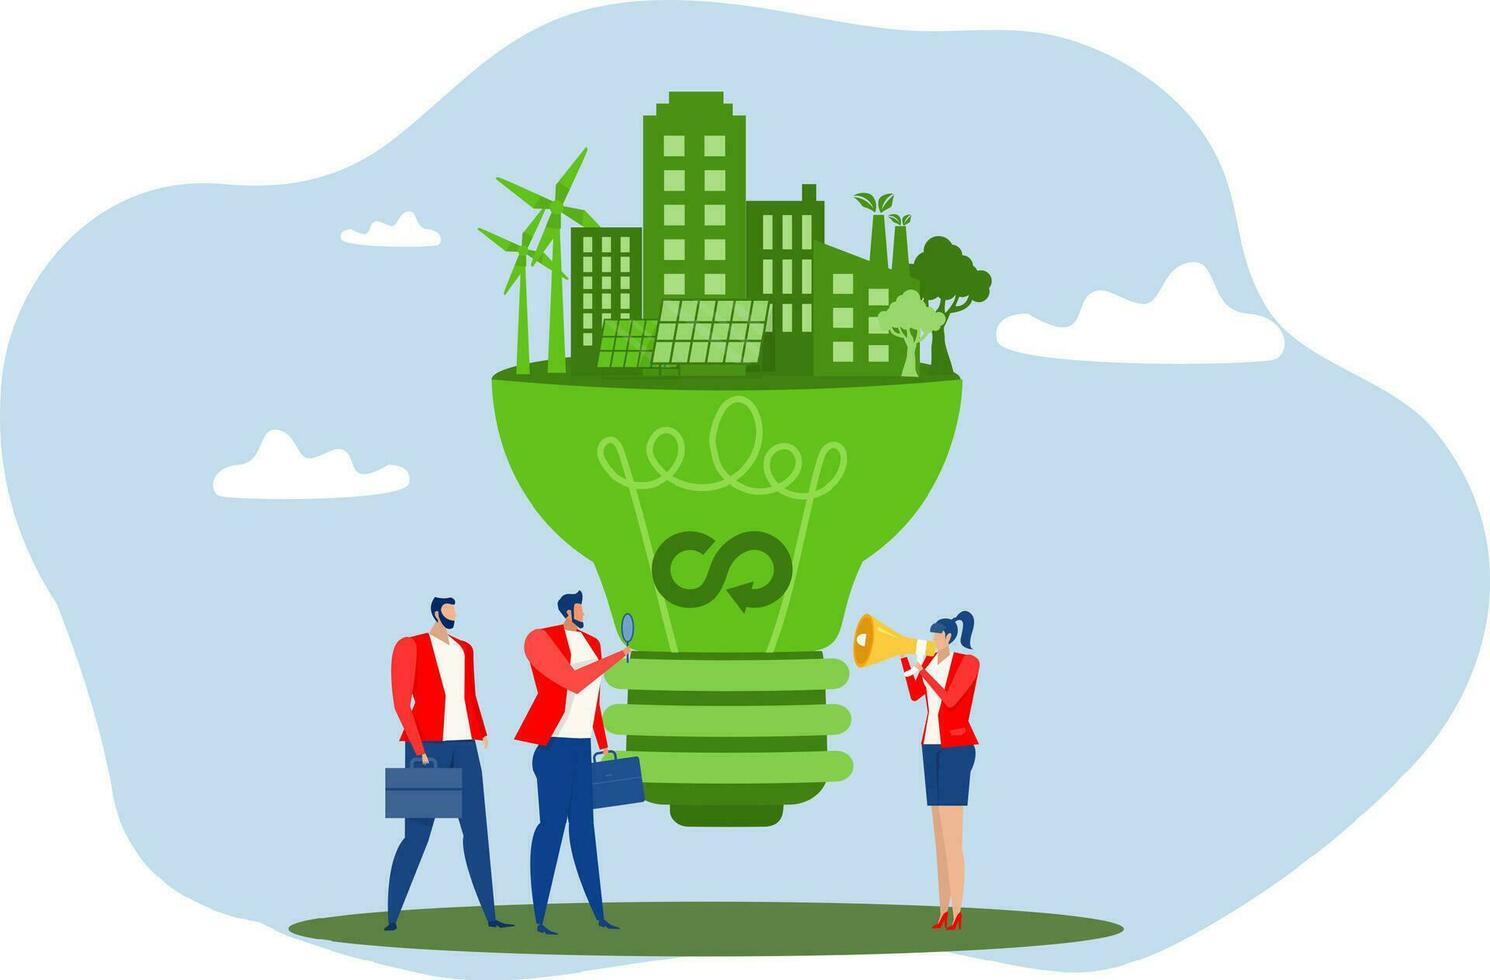 bcg economy investment,green energy Environment, sustainable industry with windmill and solar energy panels. Environmental, Social management problems and Corporate Governance concept vector